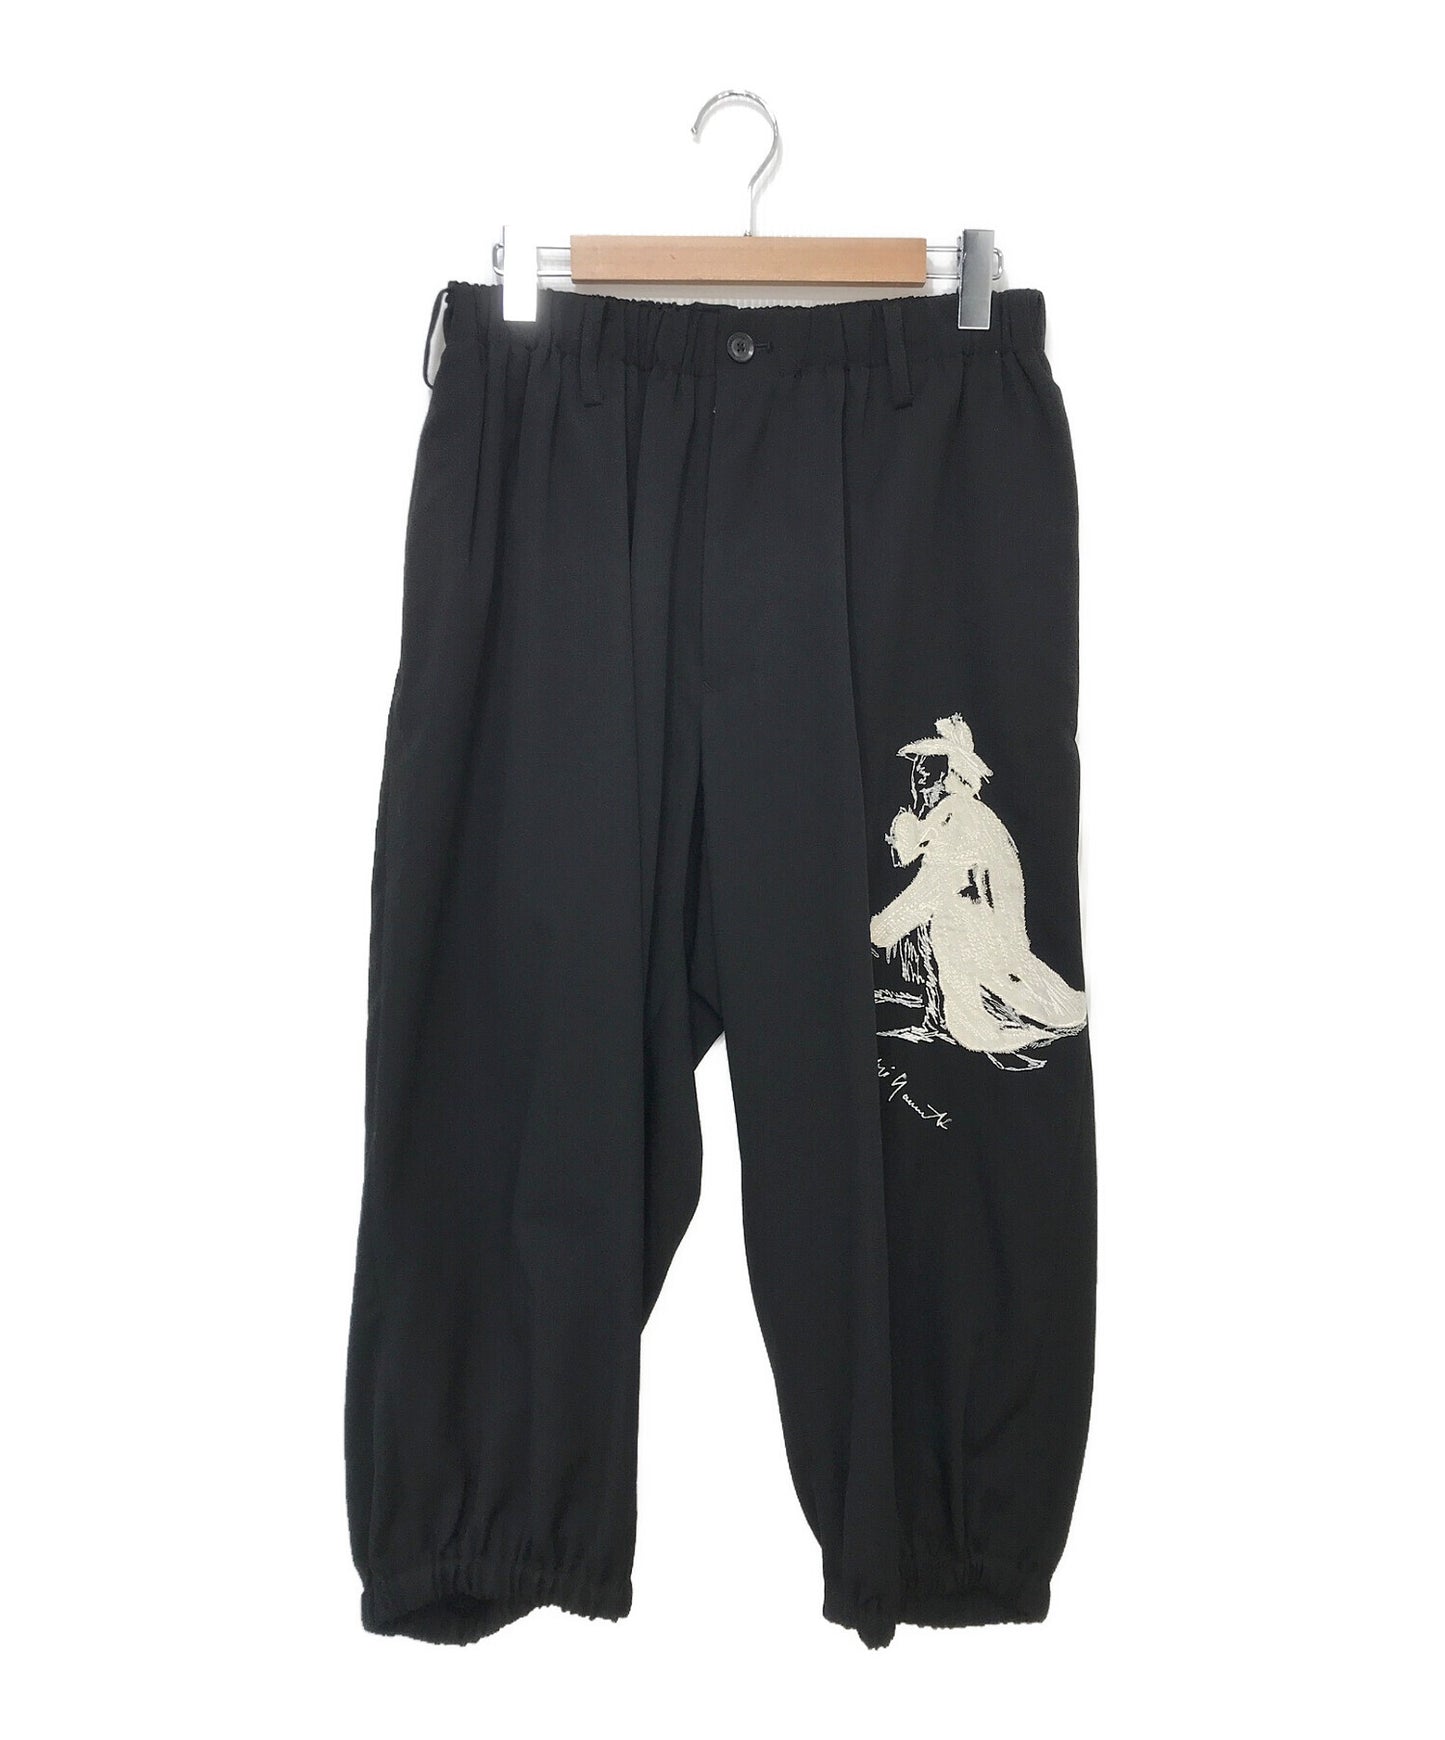 Yohji Yamamoto POUR HOMME Ink Painting Embroidery Pants HN-P91-102